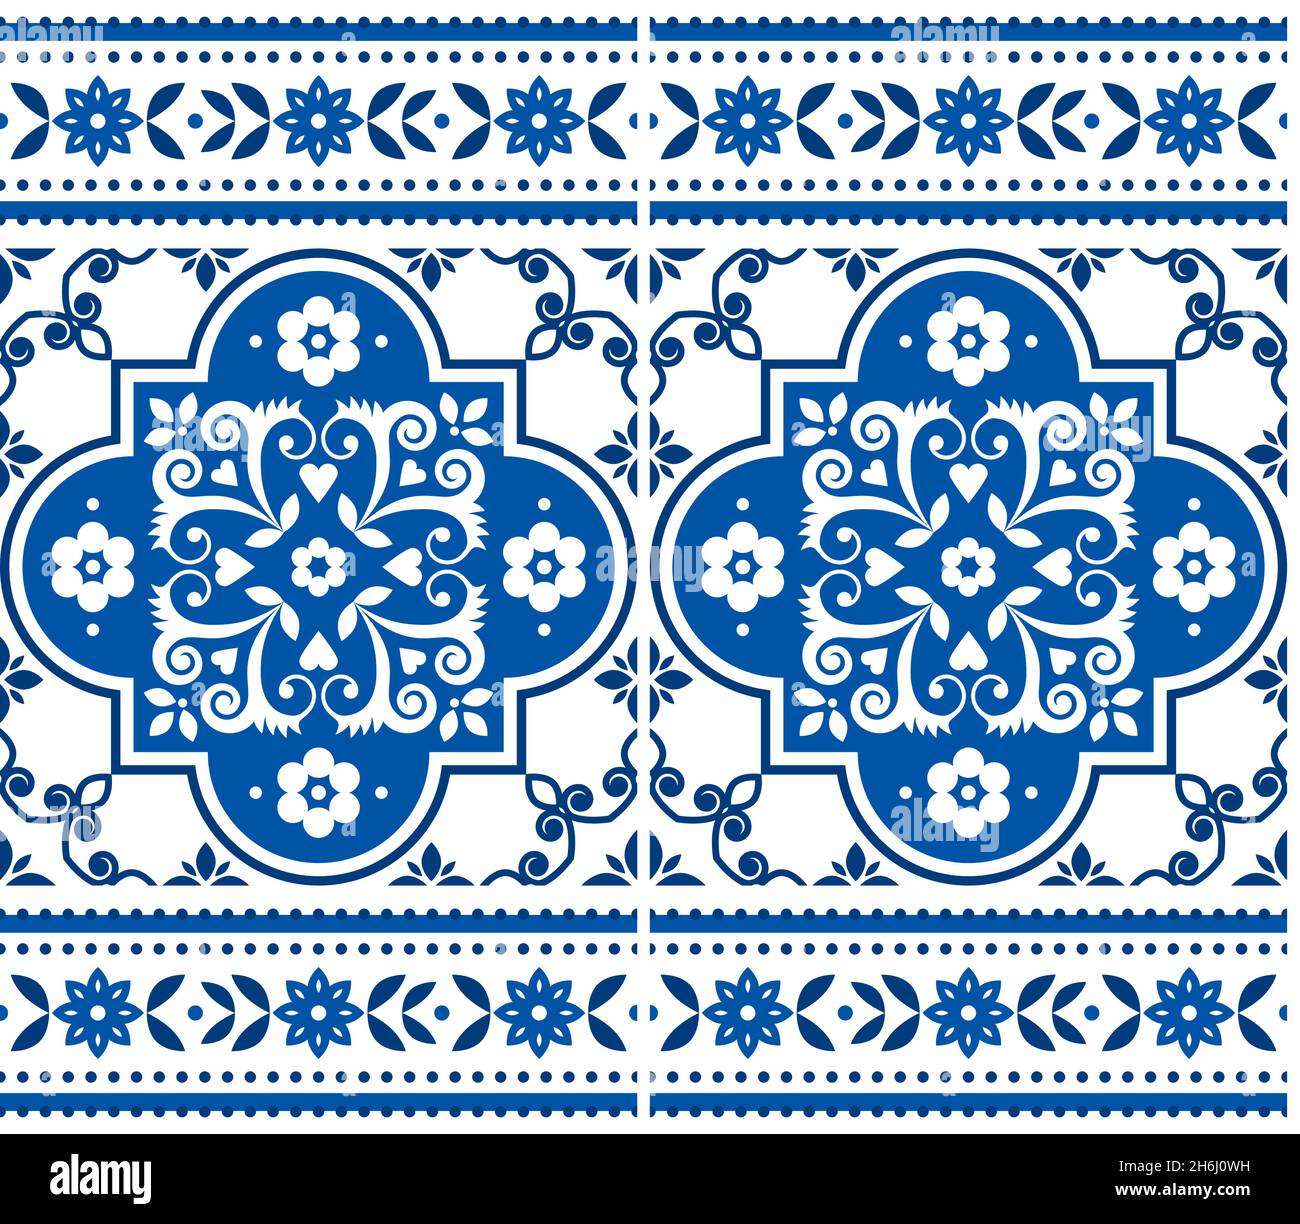 Azulejo tiles seamless vector pattern in navy blue and white with a frame, traditional floral design inspired by tile art from Lisbon, Portugal Stock Vector